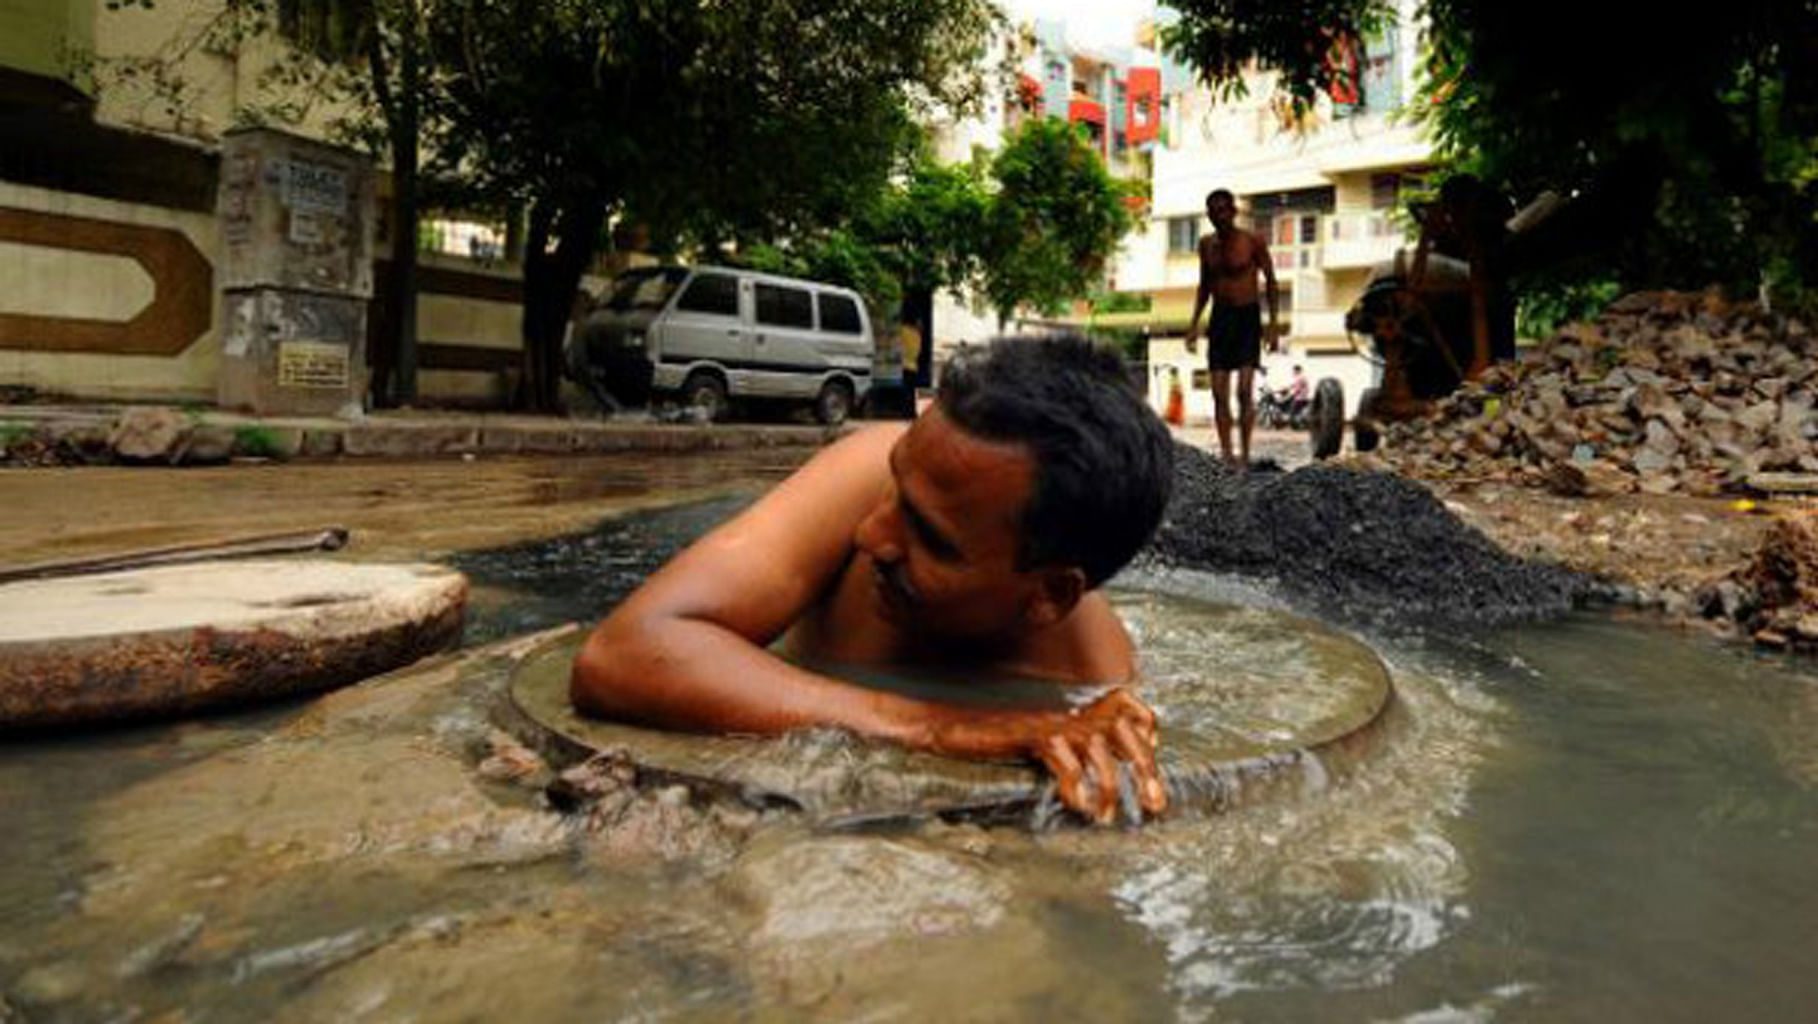 Sanitation workers are forced to work without any protective apparatus. (Photo Courtesy: <i>The News Minute</i>)